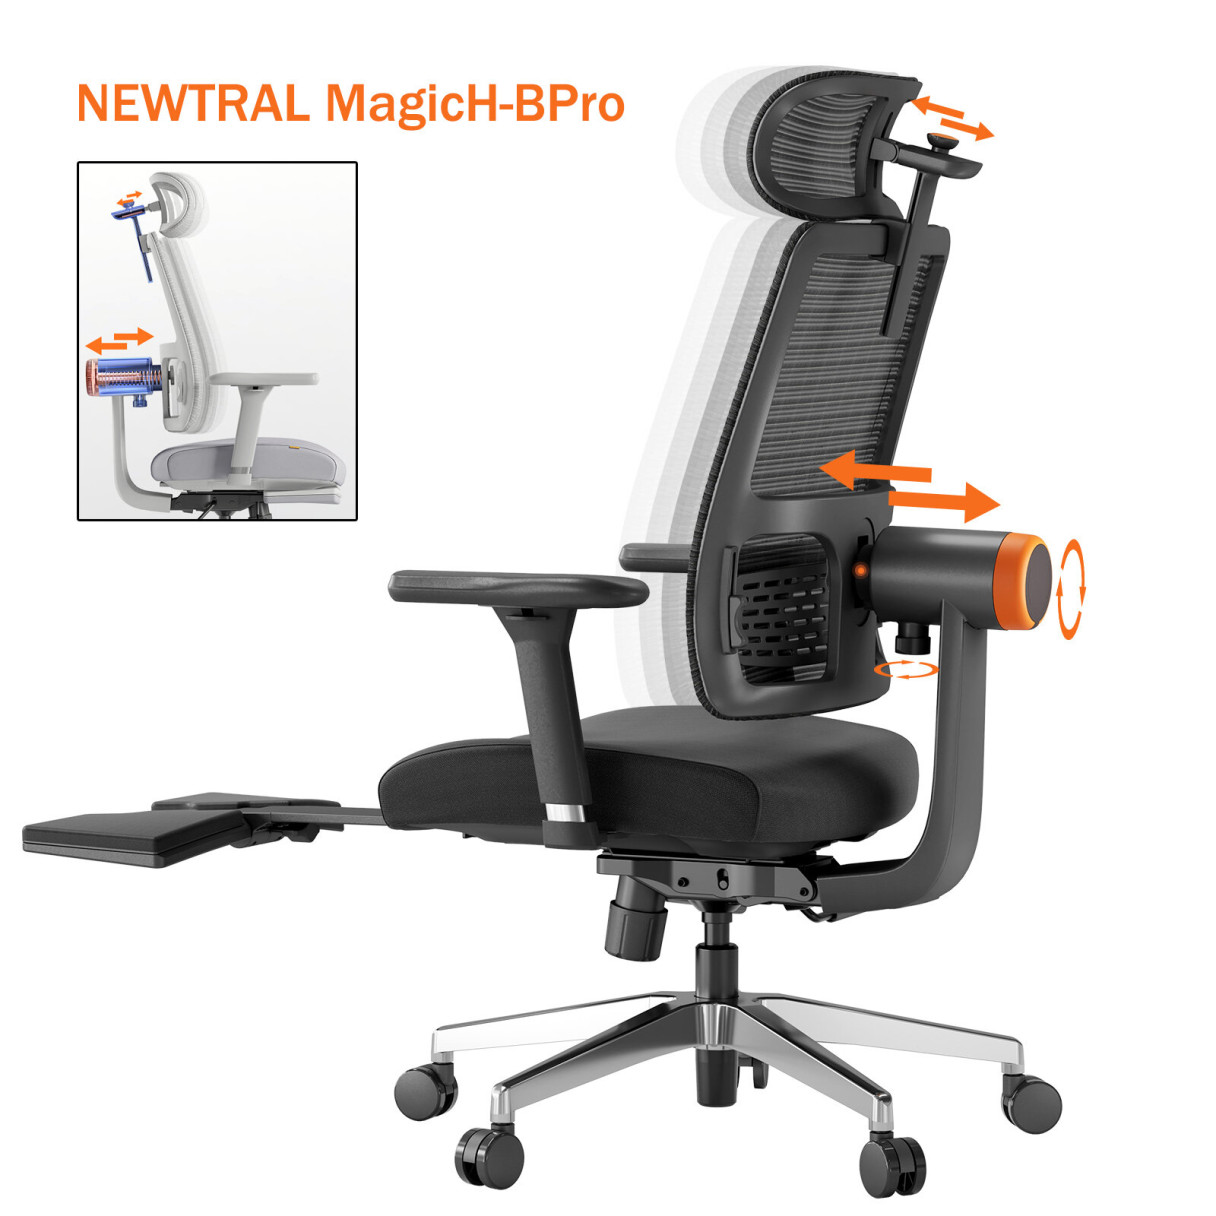 NEWTRAL MagicH-BPro Ergonomic Chair with Footrest, Auto-Following Backrest Headrest, Adaptive Lower Back Support, Adjustable Armrest, 4 Positions to Lock